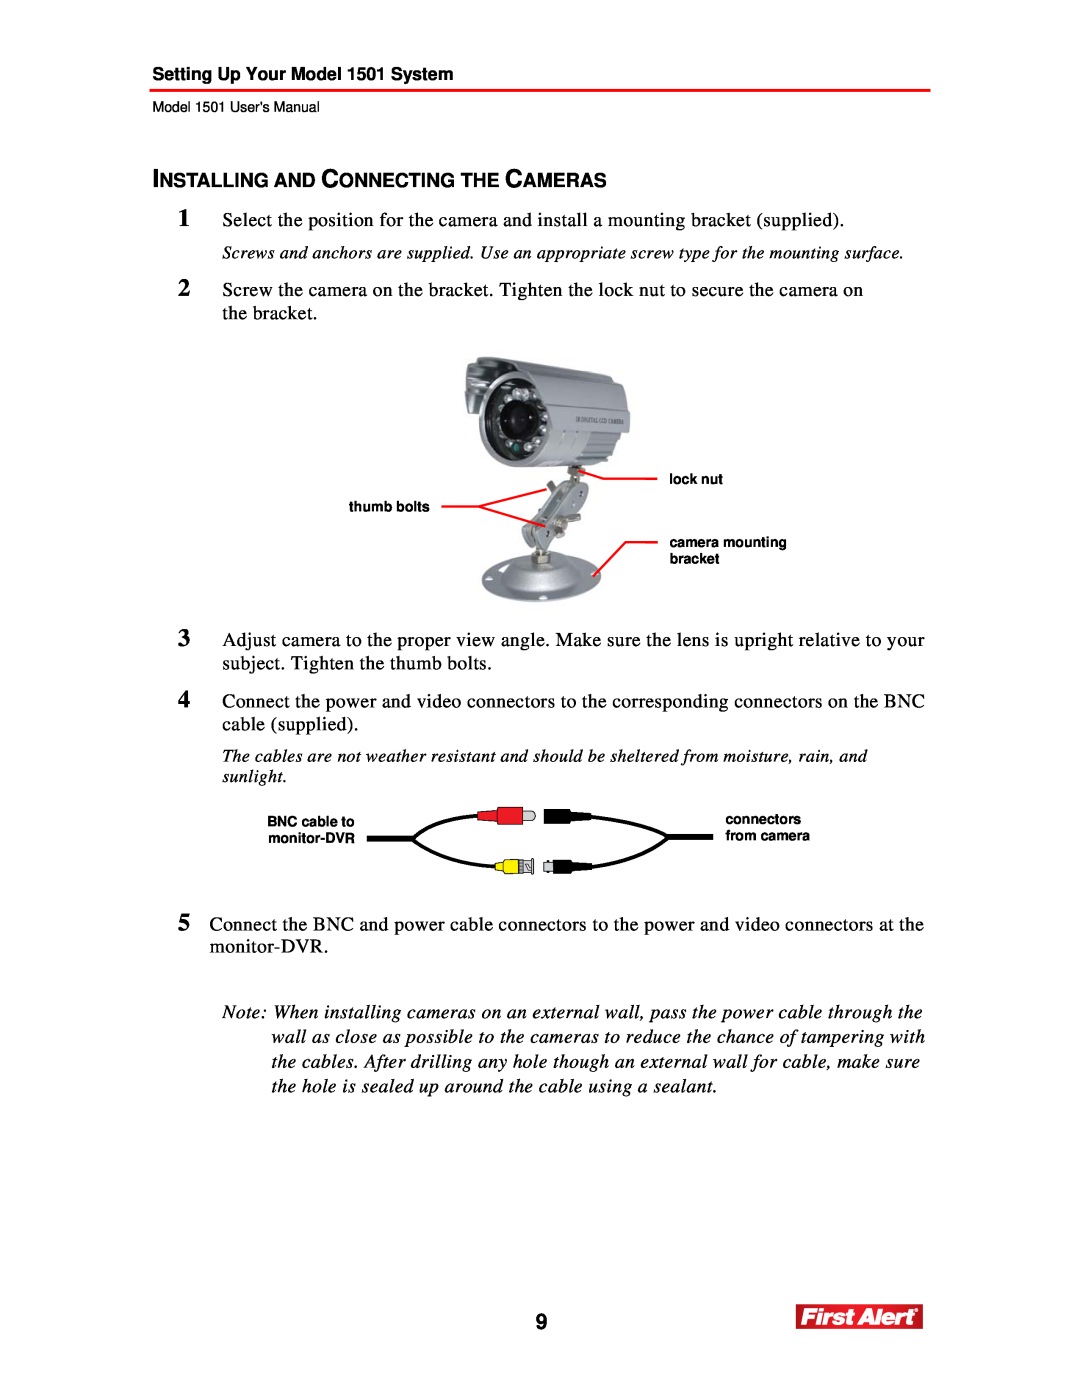 First Alert 1501 user manual Installing And Connecting The Cameras, connectors from camera 